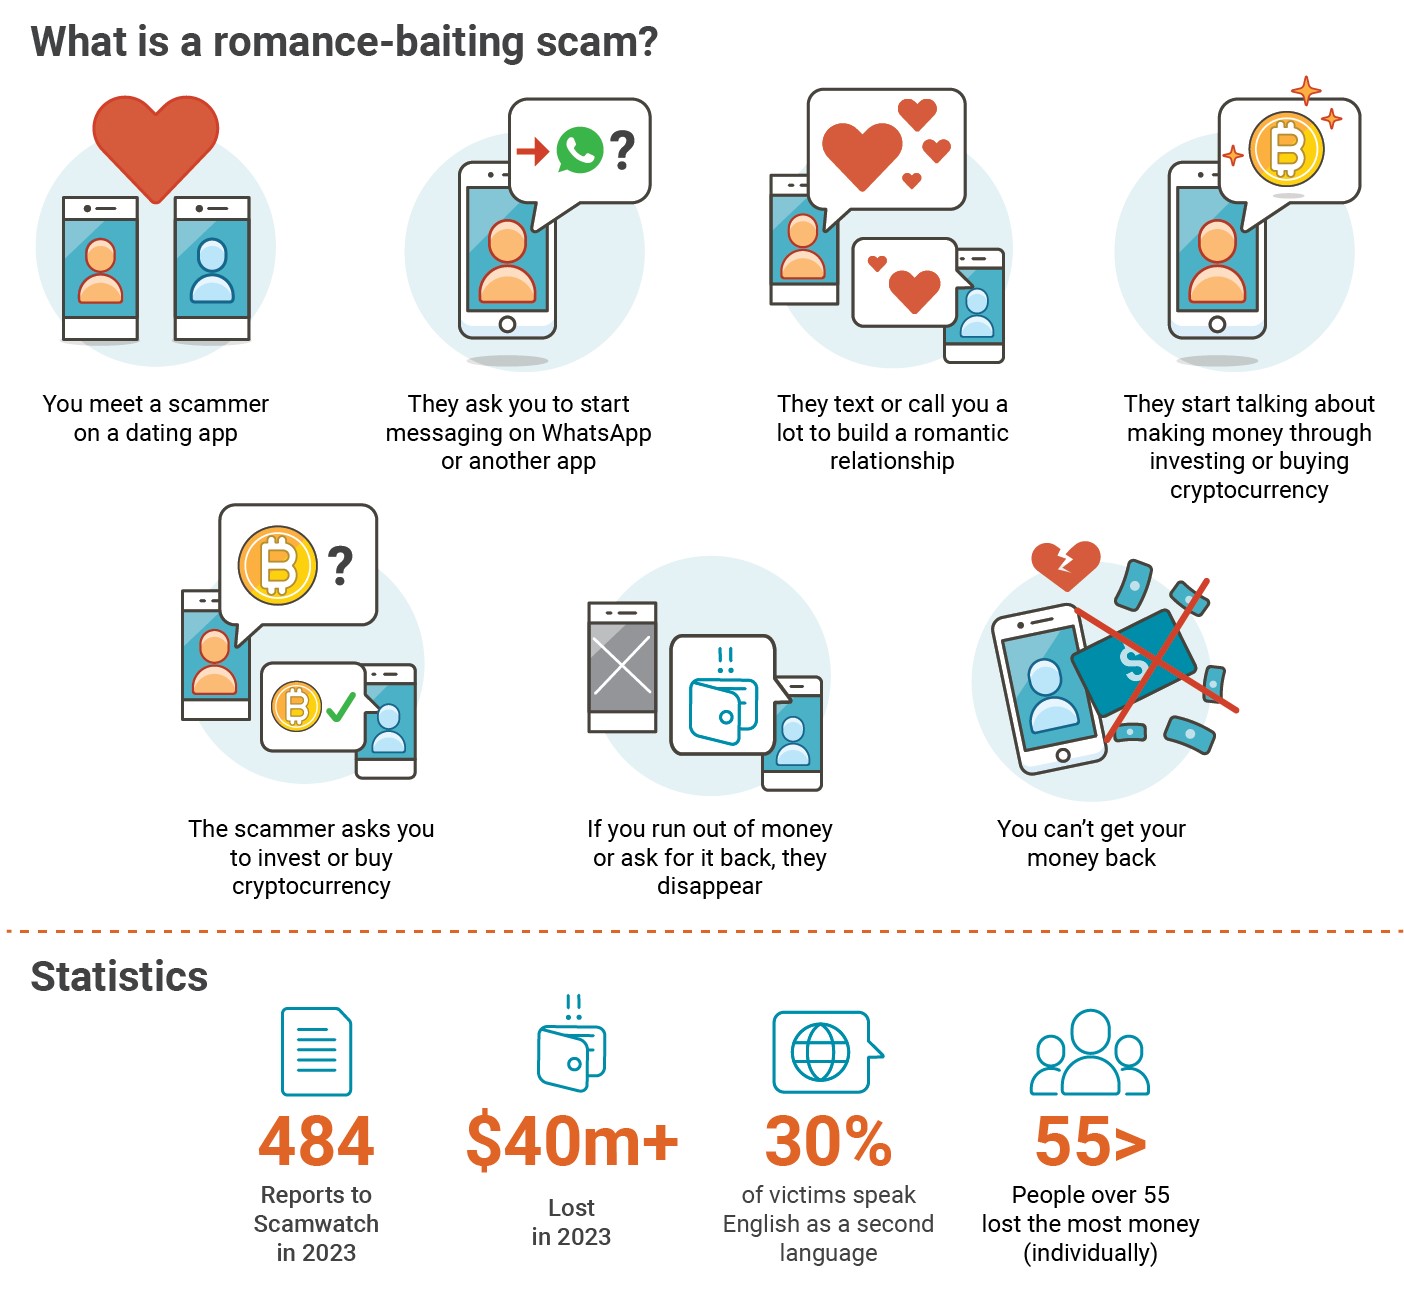 Romance scams see $40 million lost in 2023 - Cybersecurity - Digital Nation